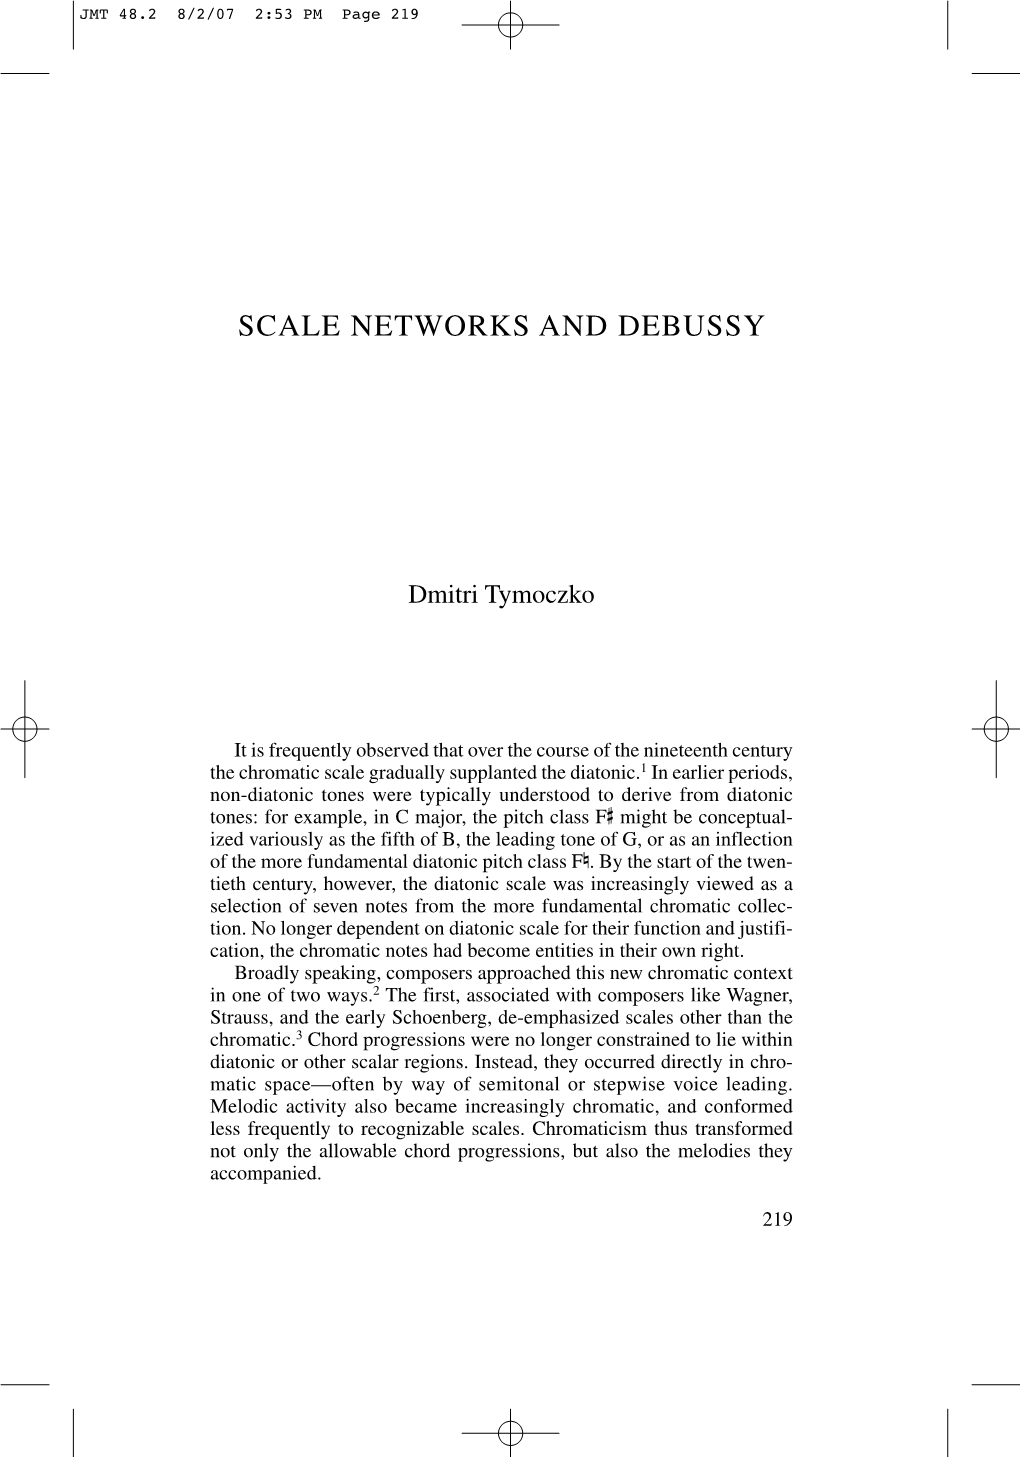 Scale Networks and Debussy